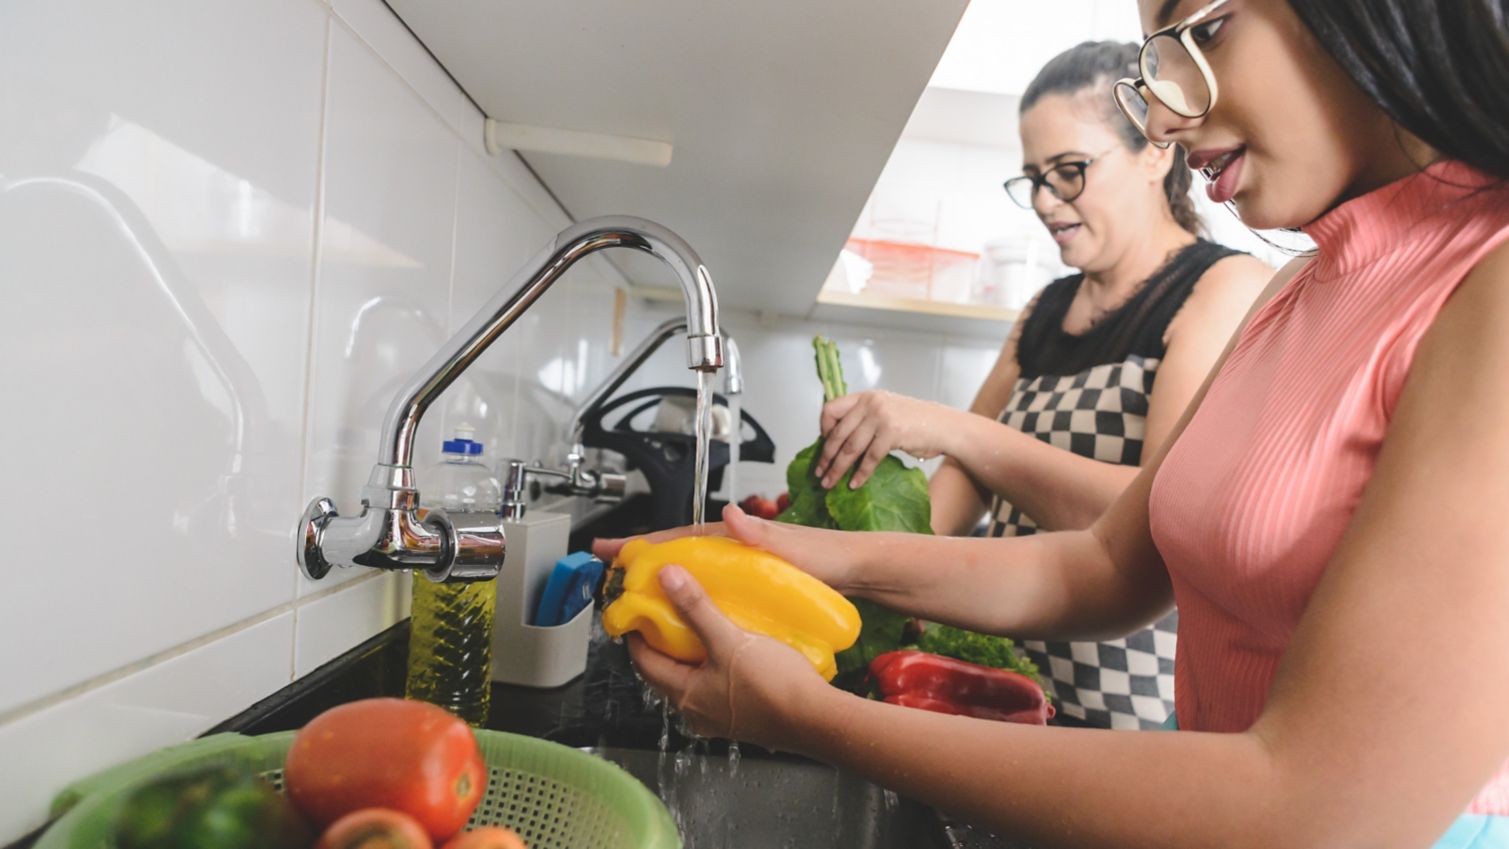 Mom and daughter preparing vegetables in kitchen